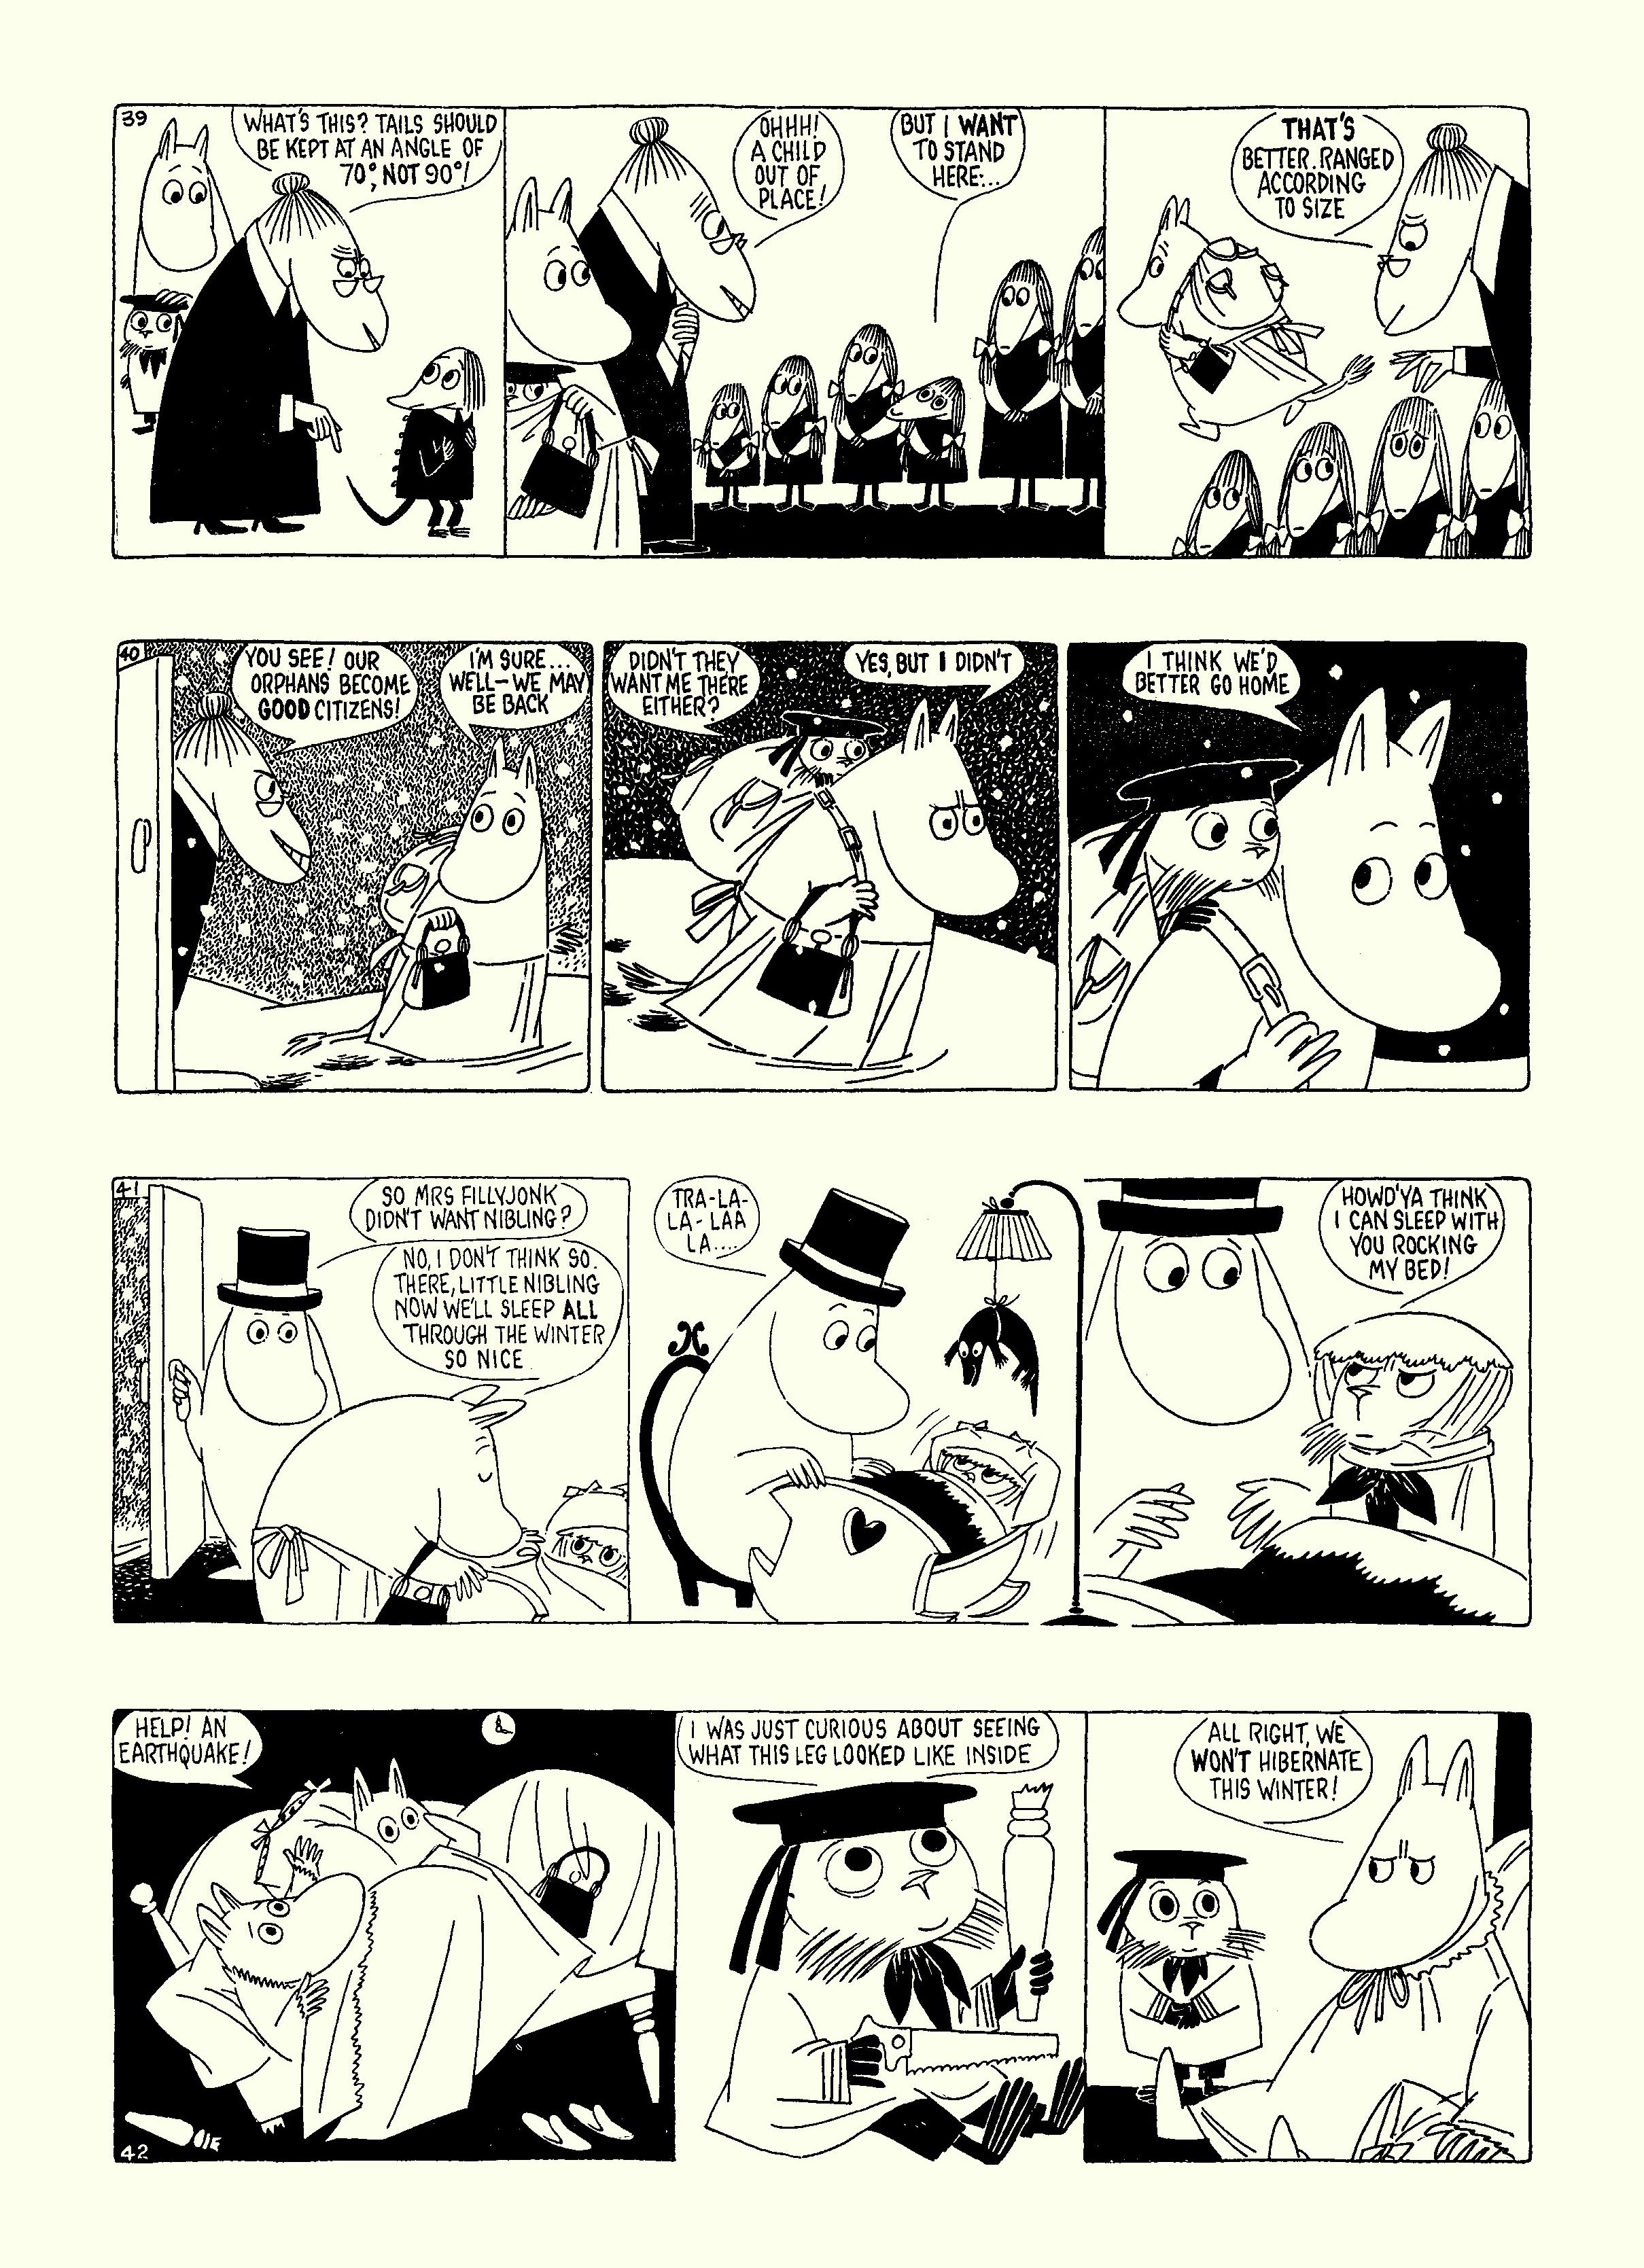 Read online Moomin: The Complete Tove Jansson Comic Strip comic -  Issue # TPB 5 - 16